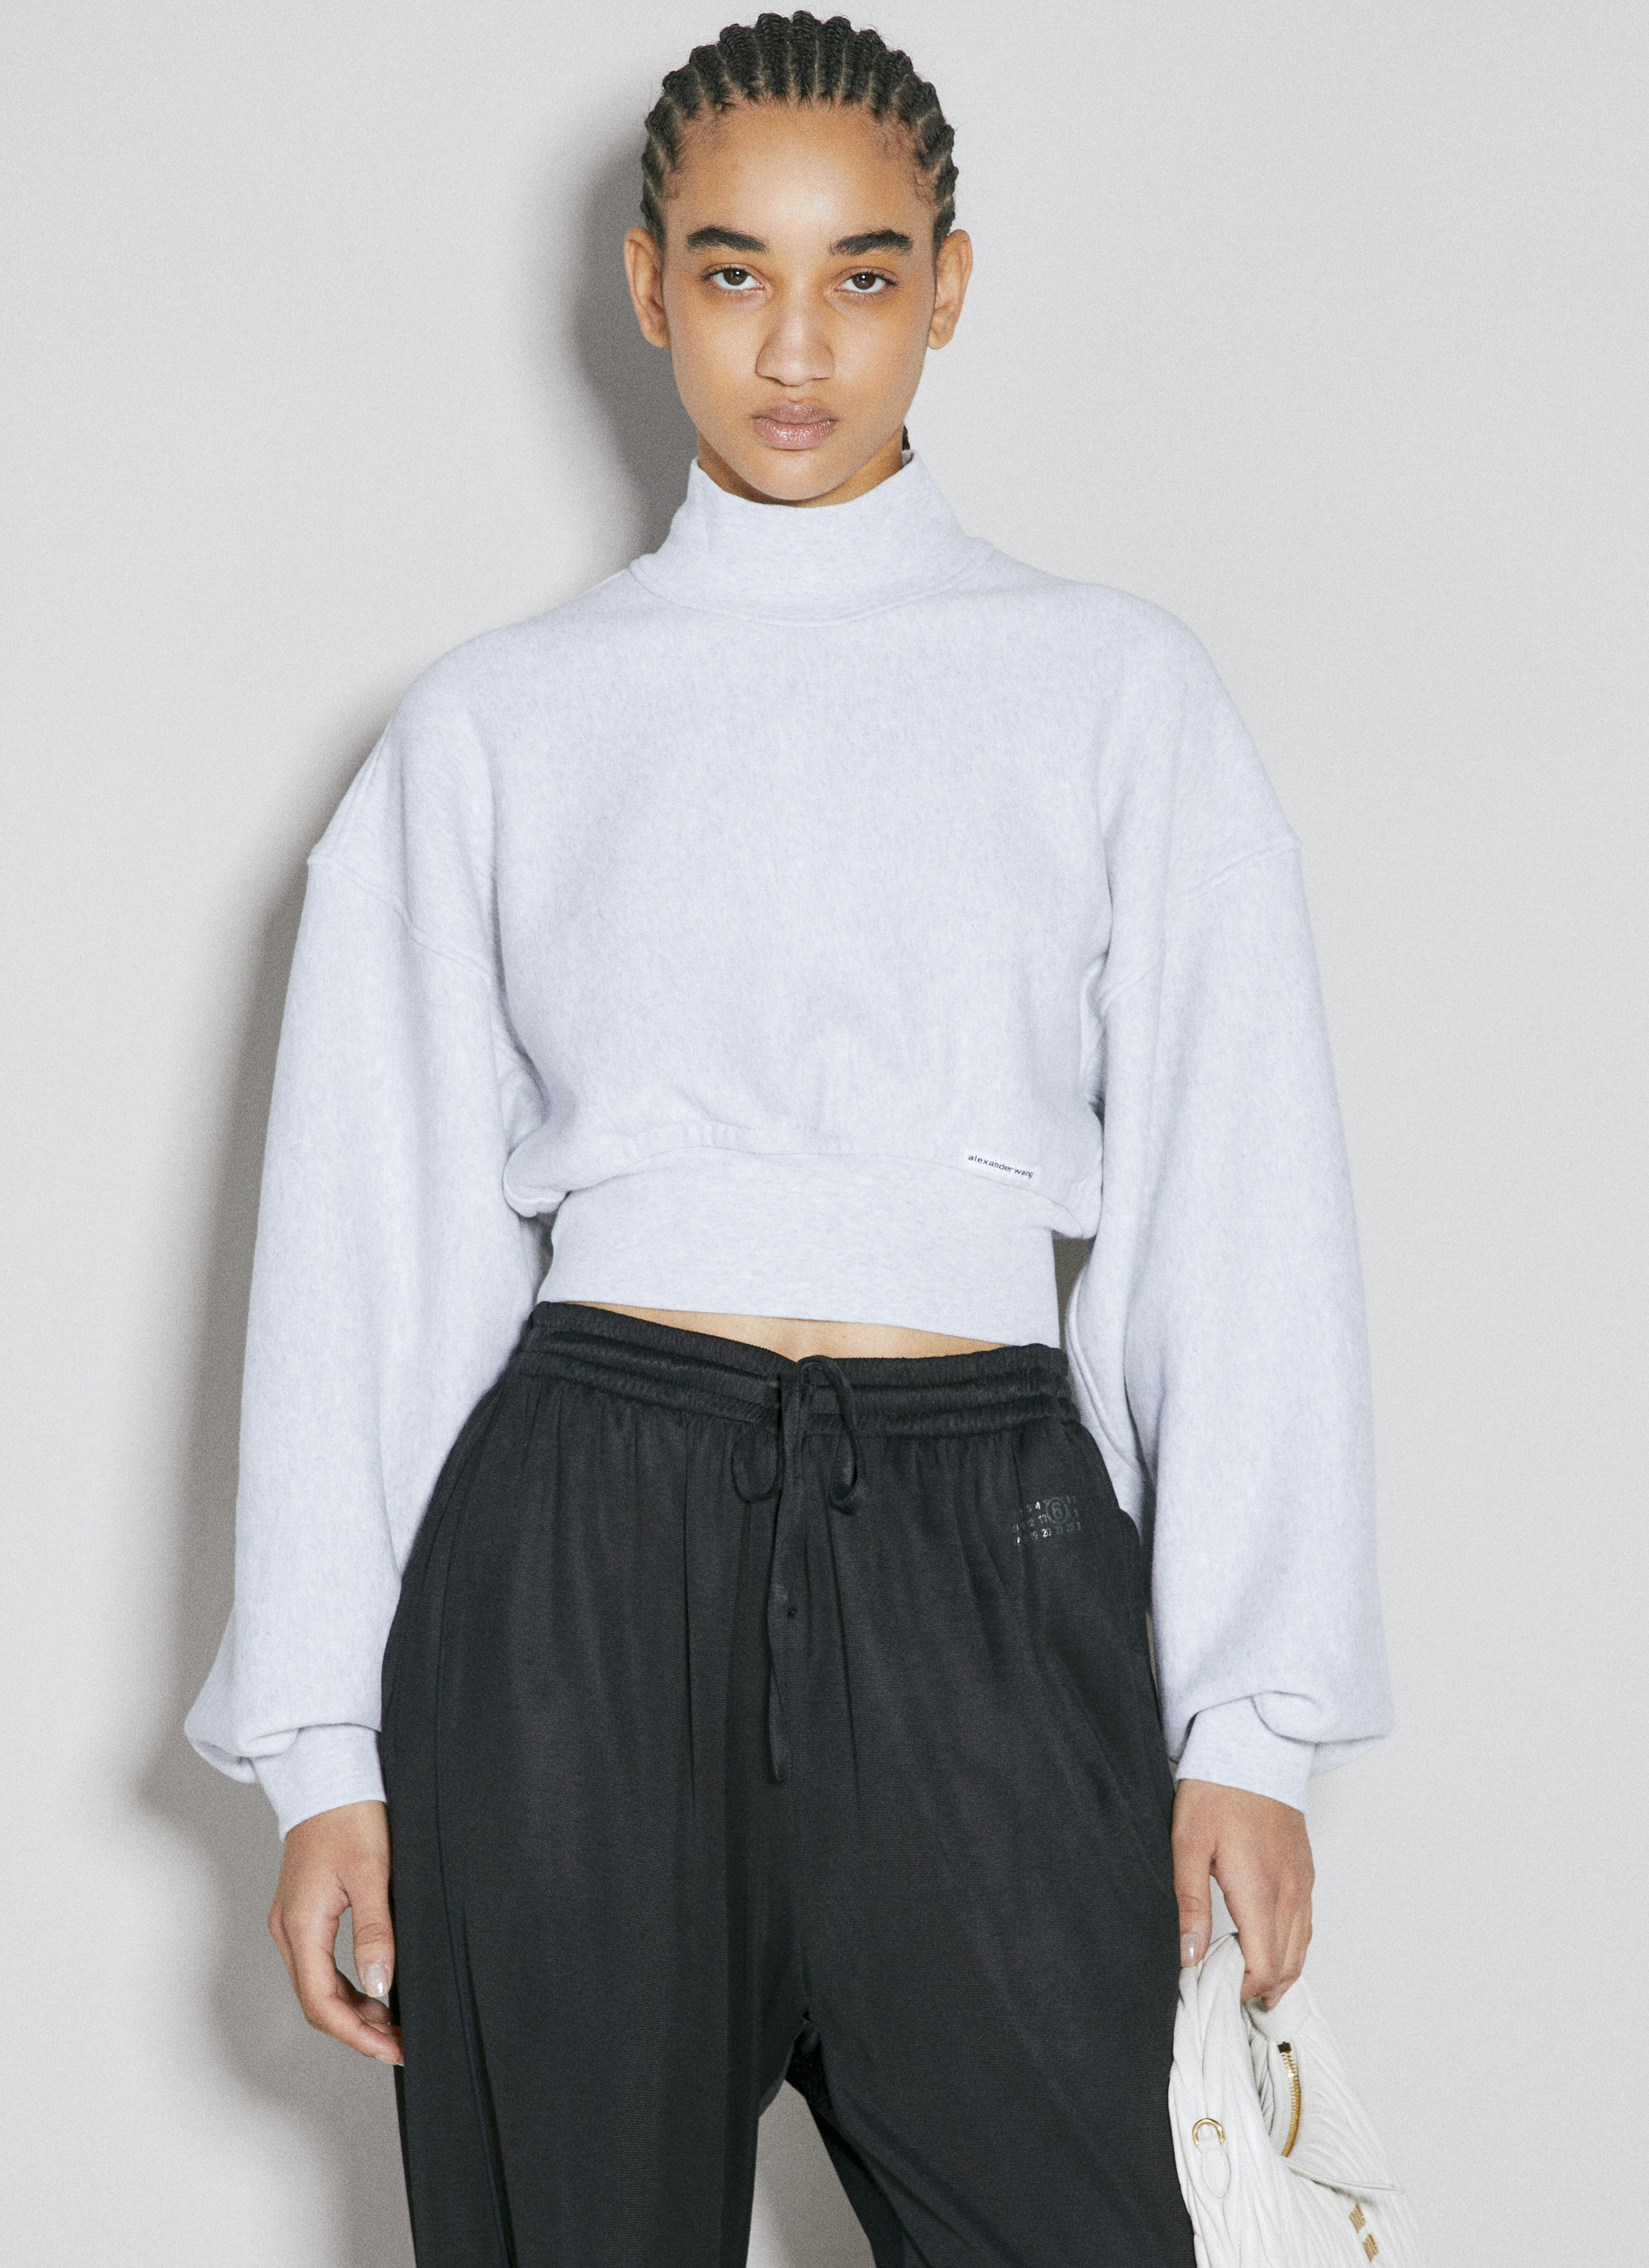 Alexander Wang Cropped High Neck Sweater Black awg0253017